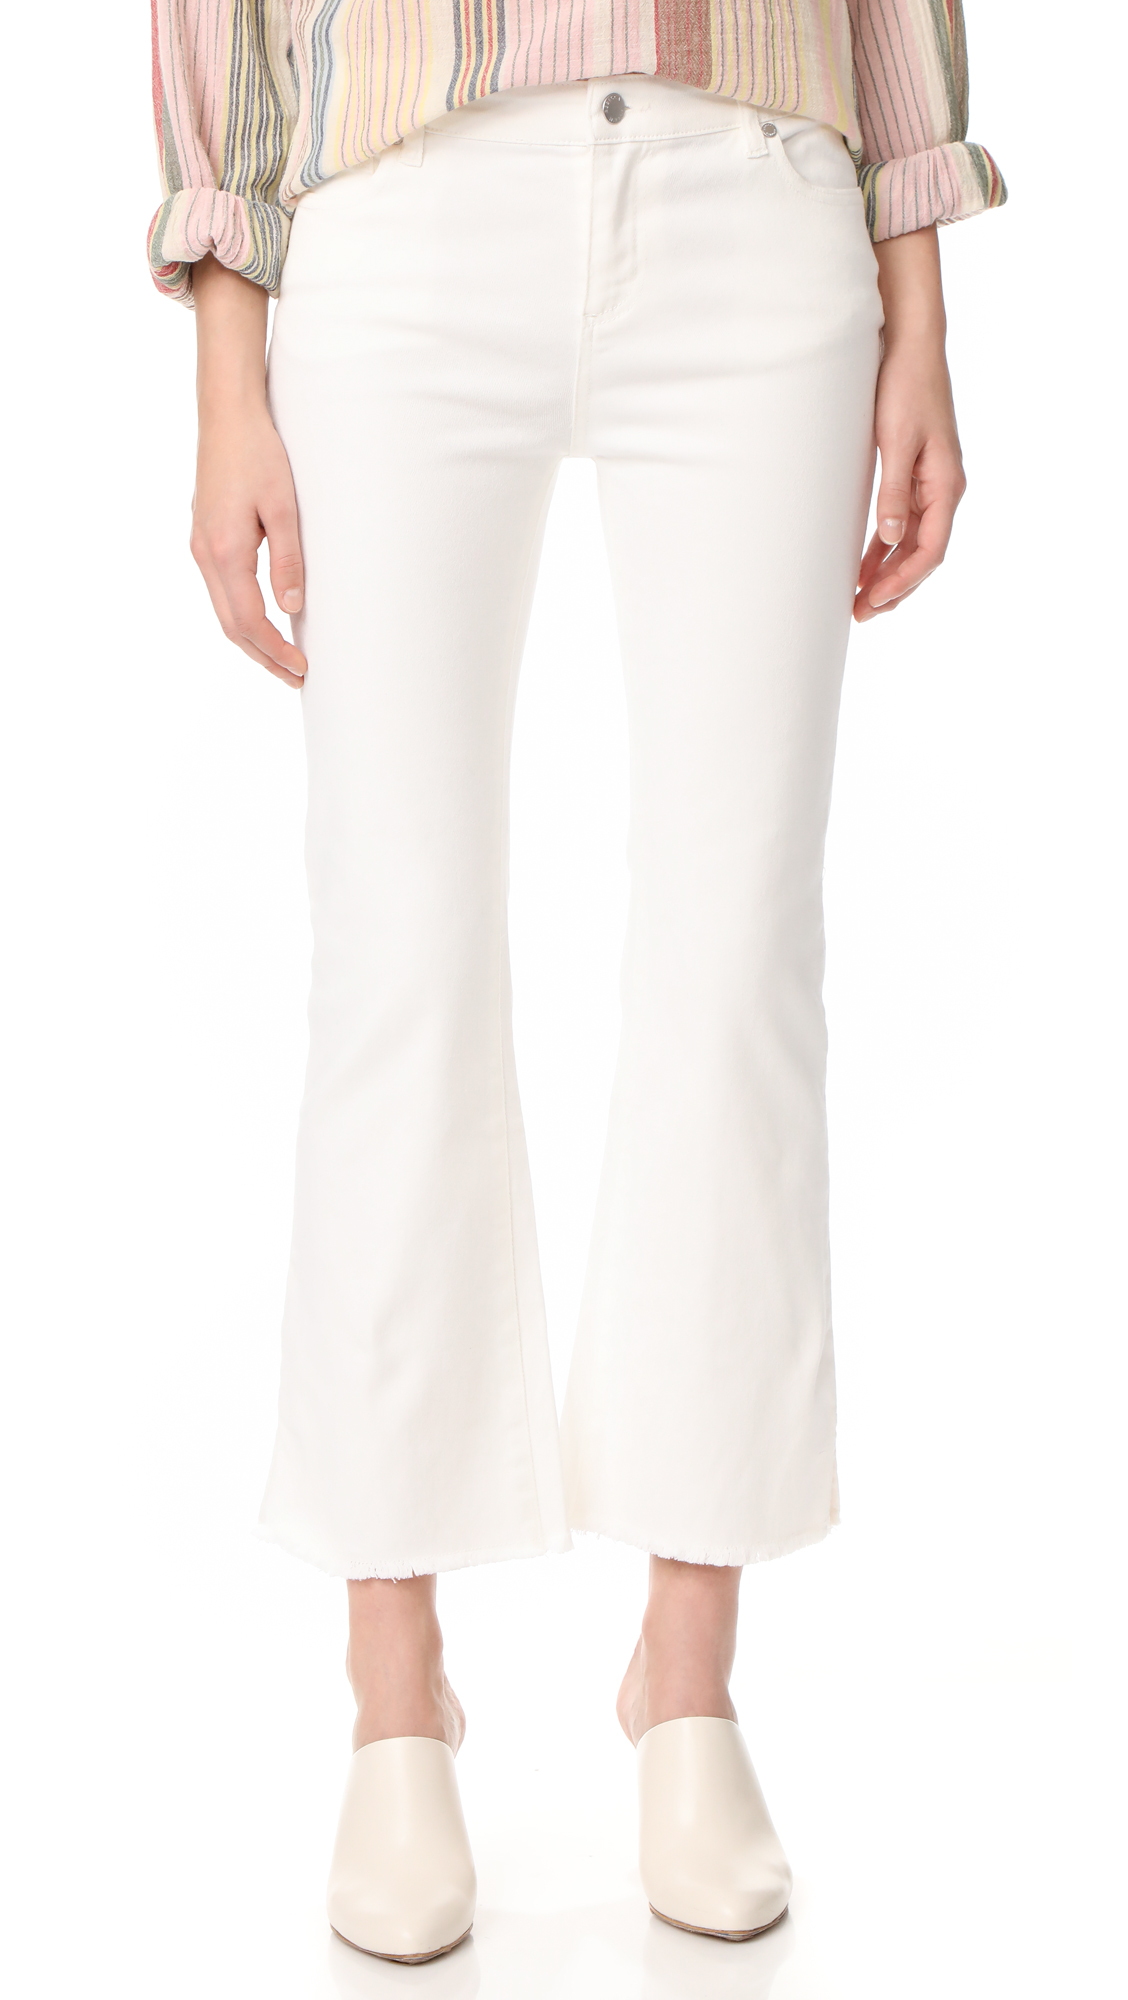 Wanted: White Jeans – I WANT TO BE HER!